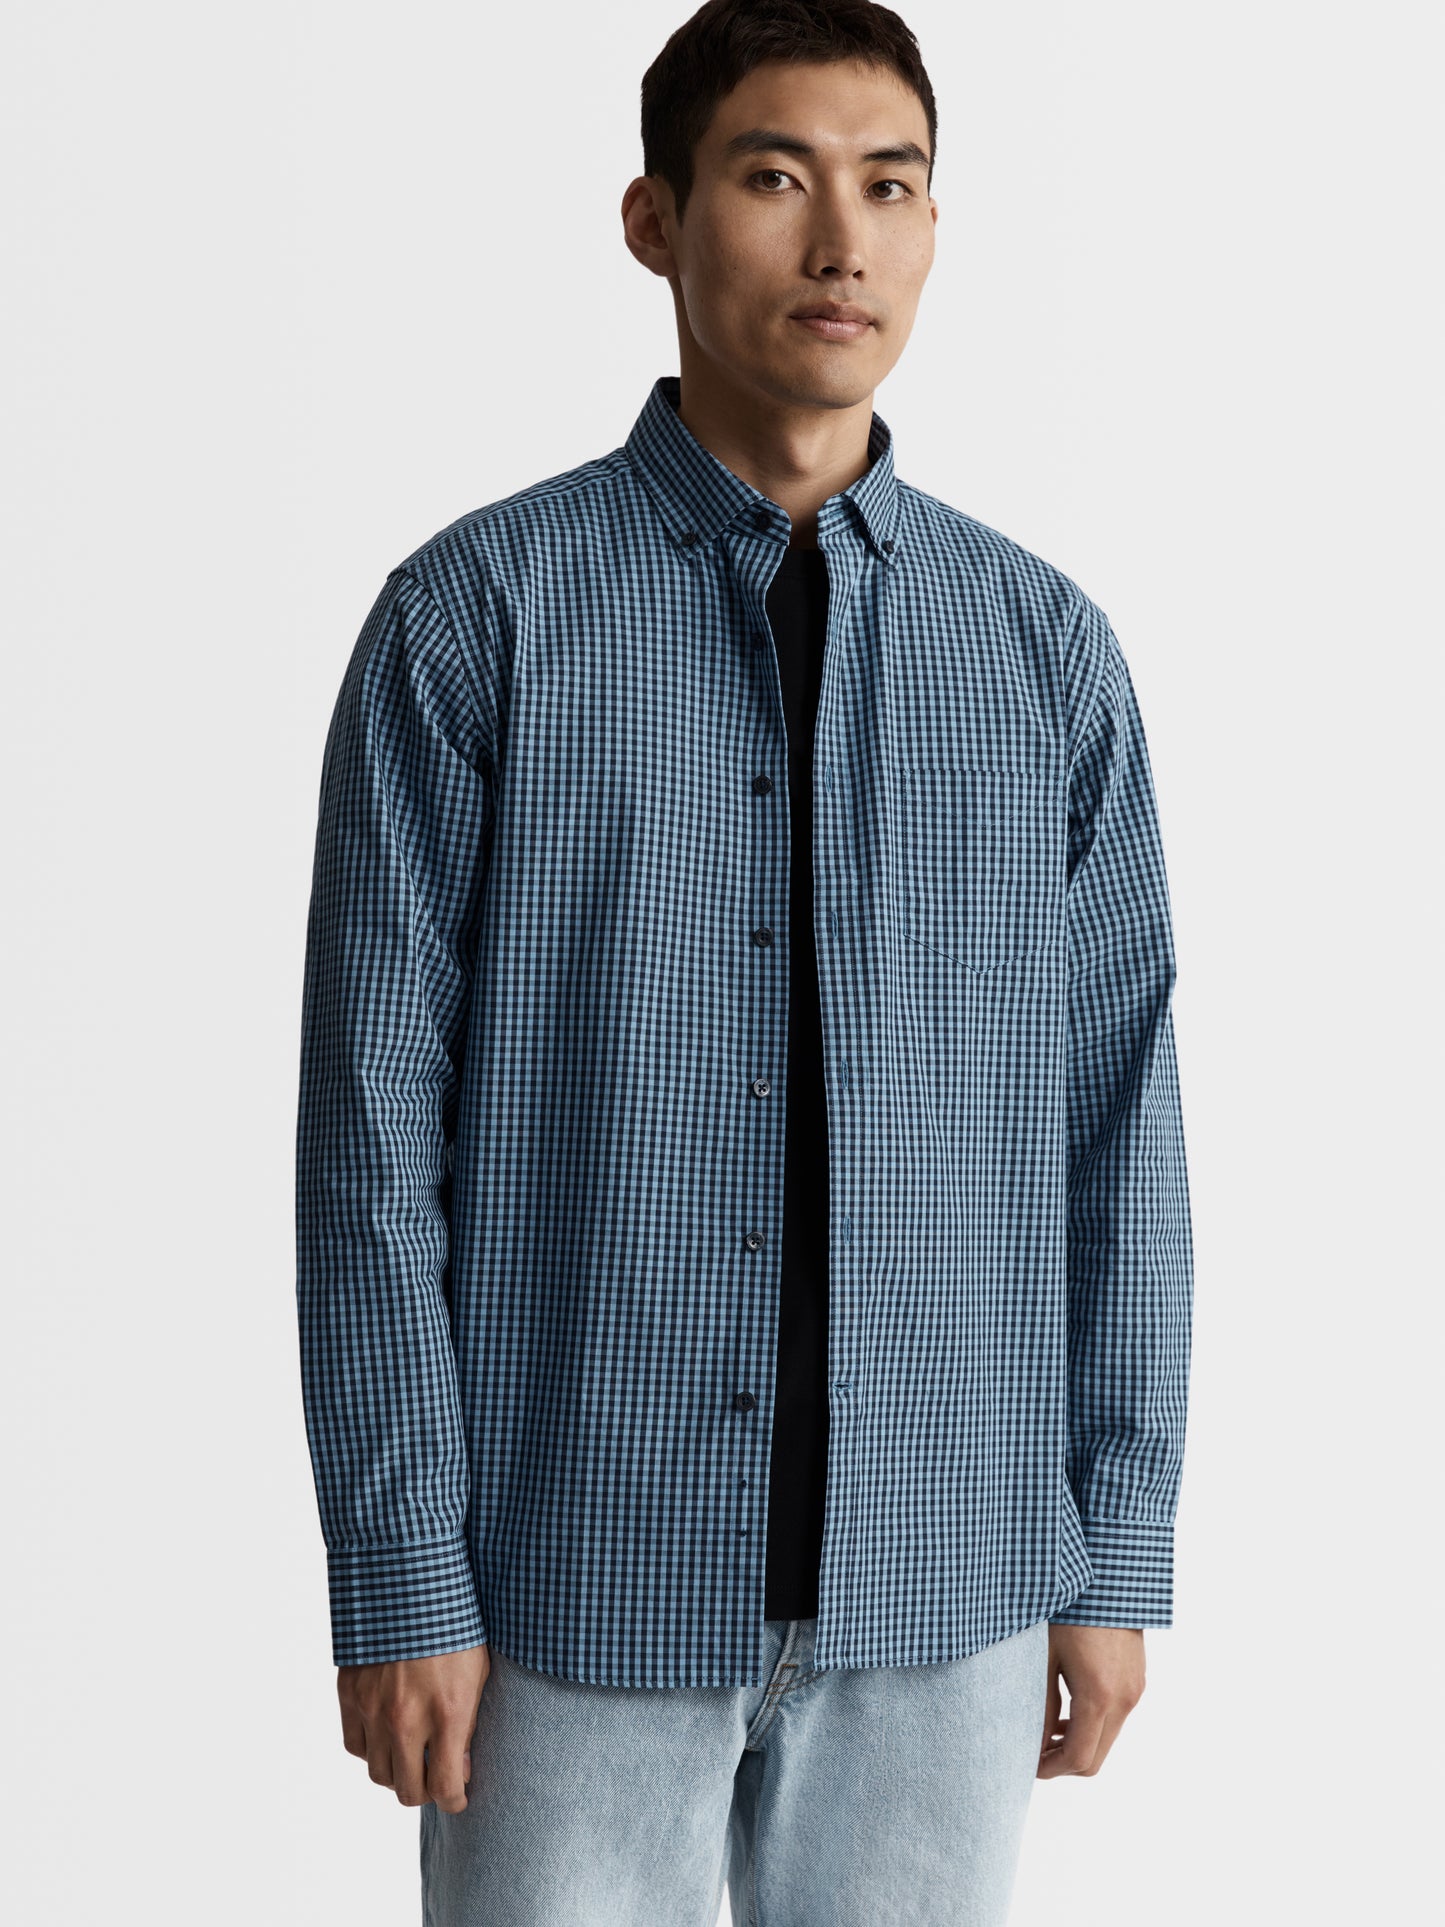 Image 2 of Slim Fit Blue and Navy Gingham Shirt